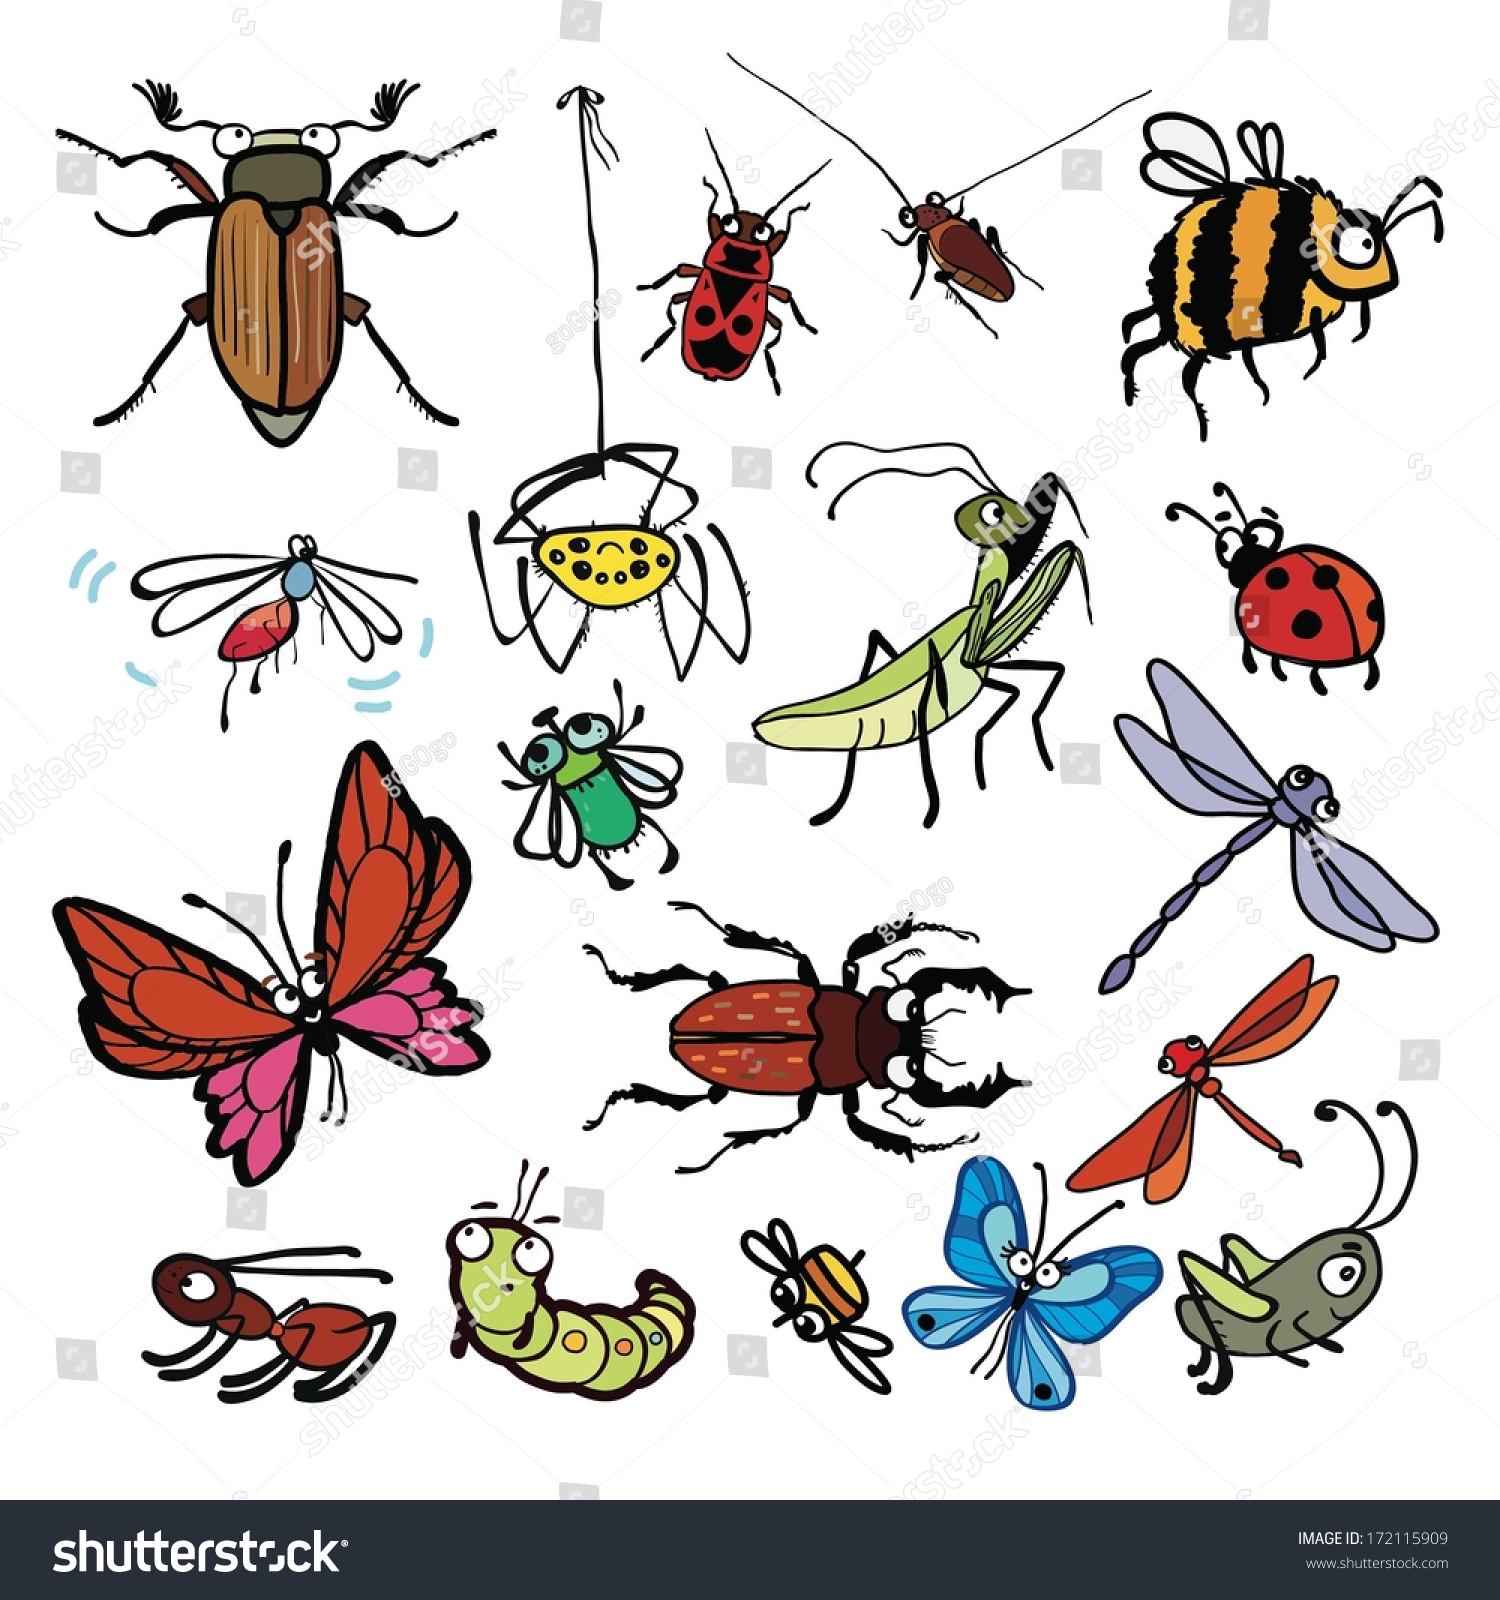 Vector Cartoon Insects Set Insects Clipart Stock Vector 1836